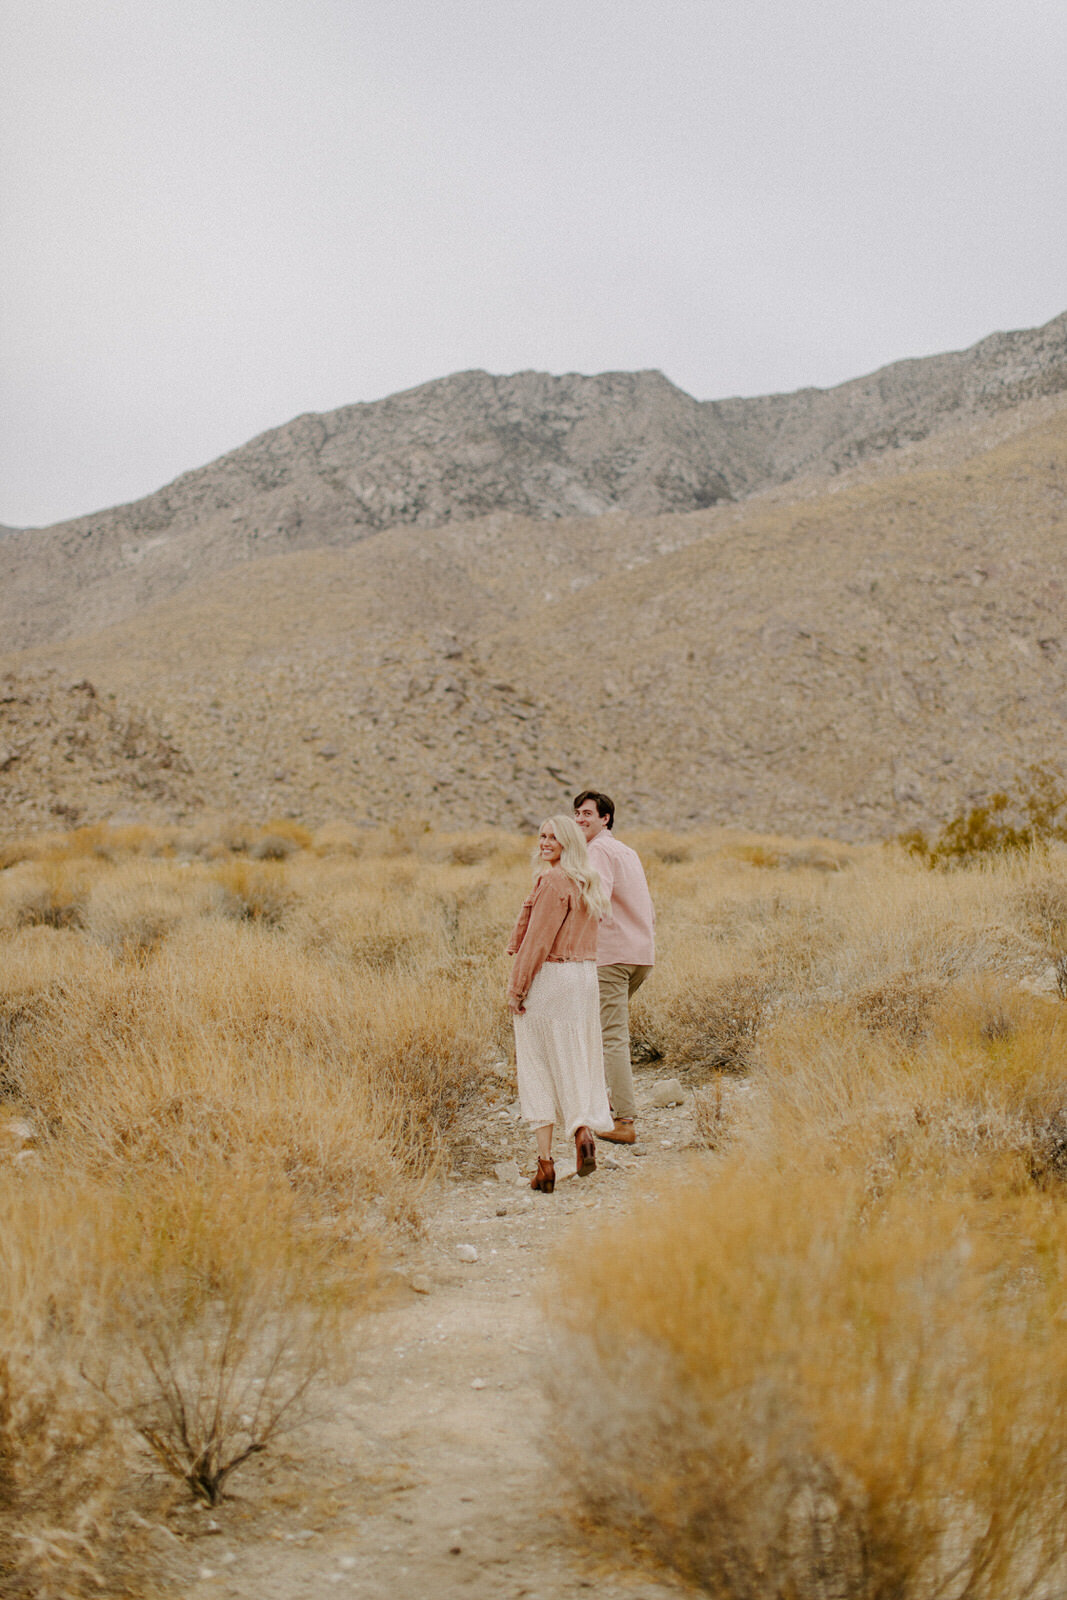 Brianna-Broyles-Photography-Pink-Palm-Springs-Engagement-Session-3.jpg